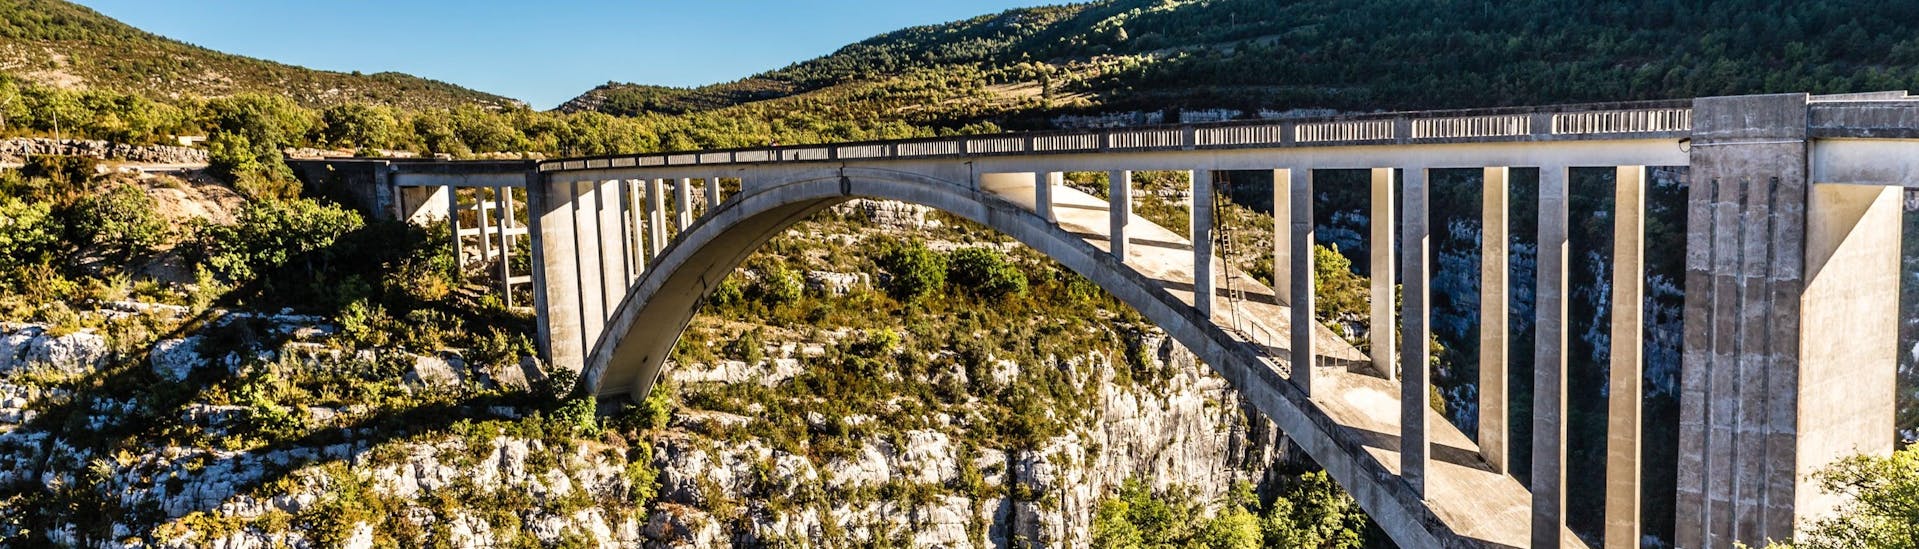 View from the Artuby bridge in the Gorges du Verdon, one of the most popular places in France for bungee jumping.